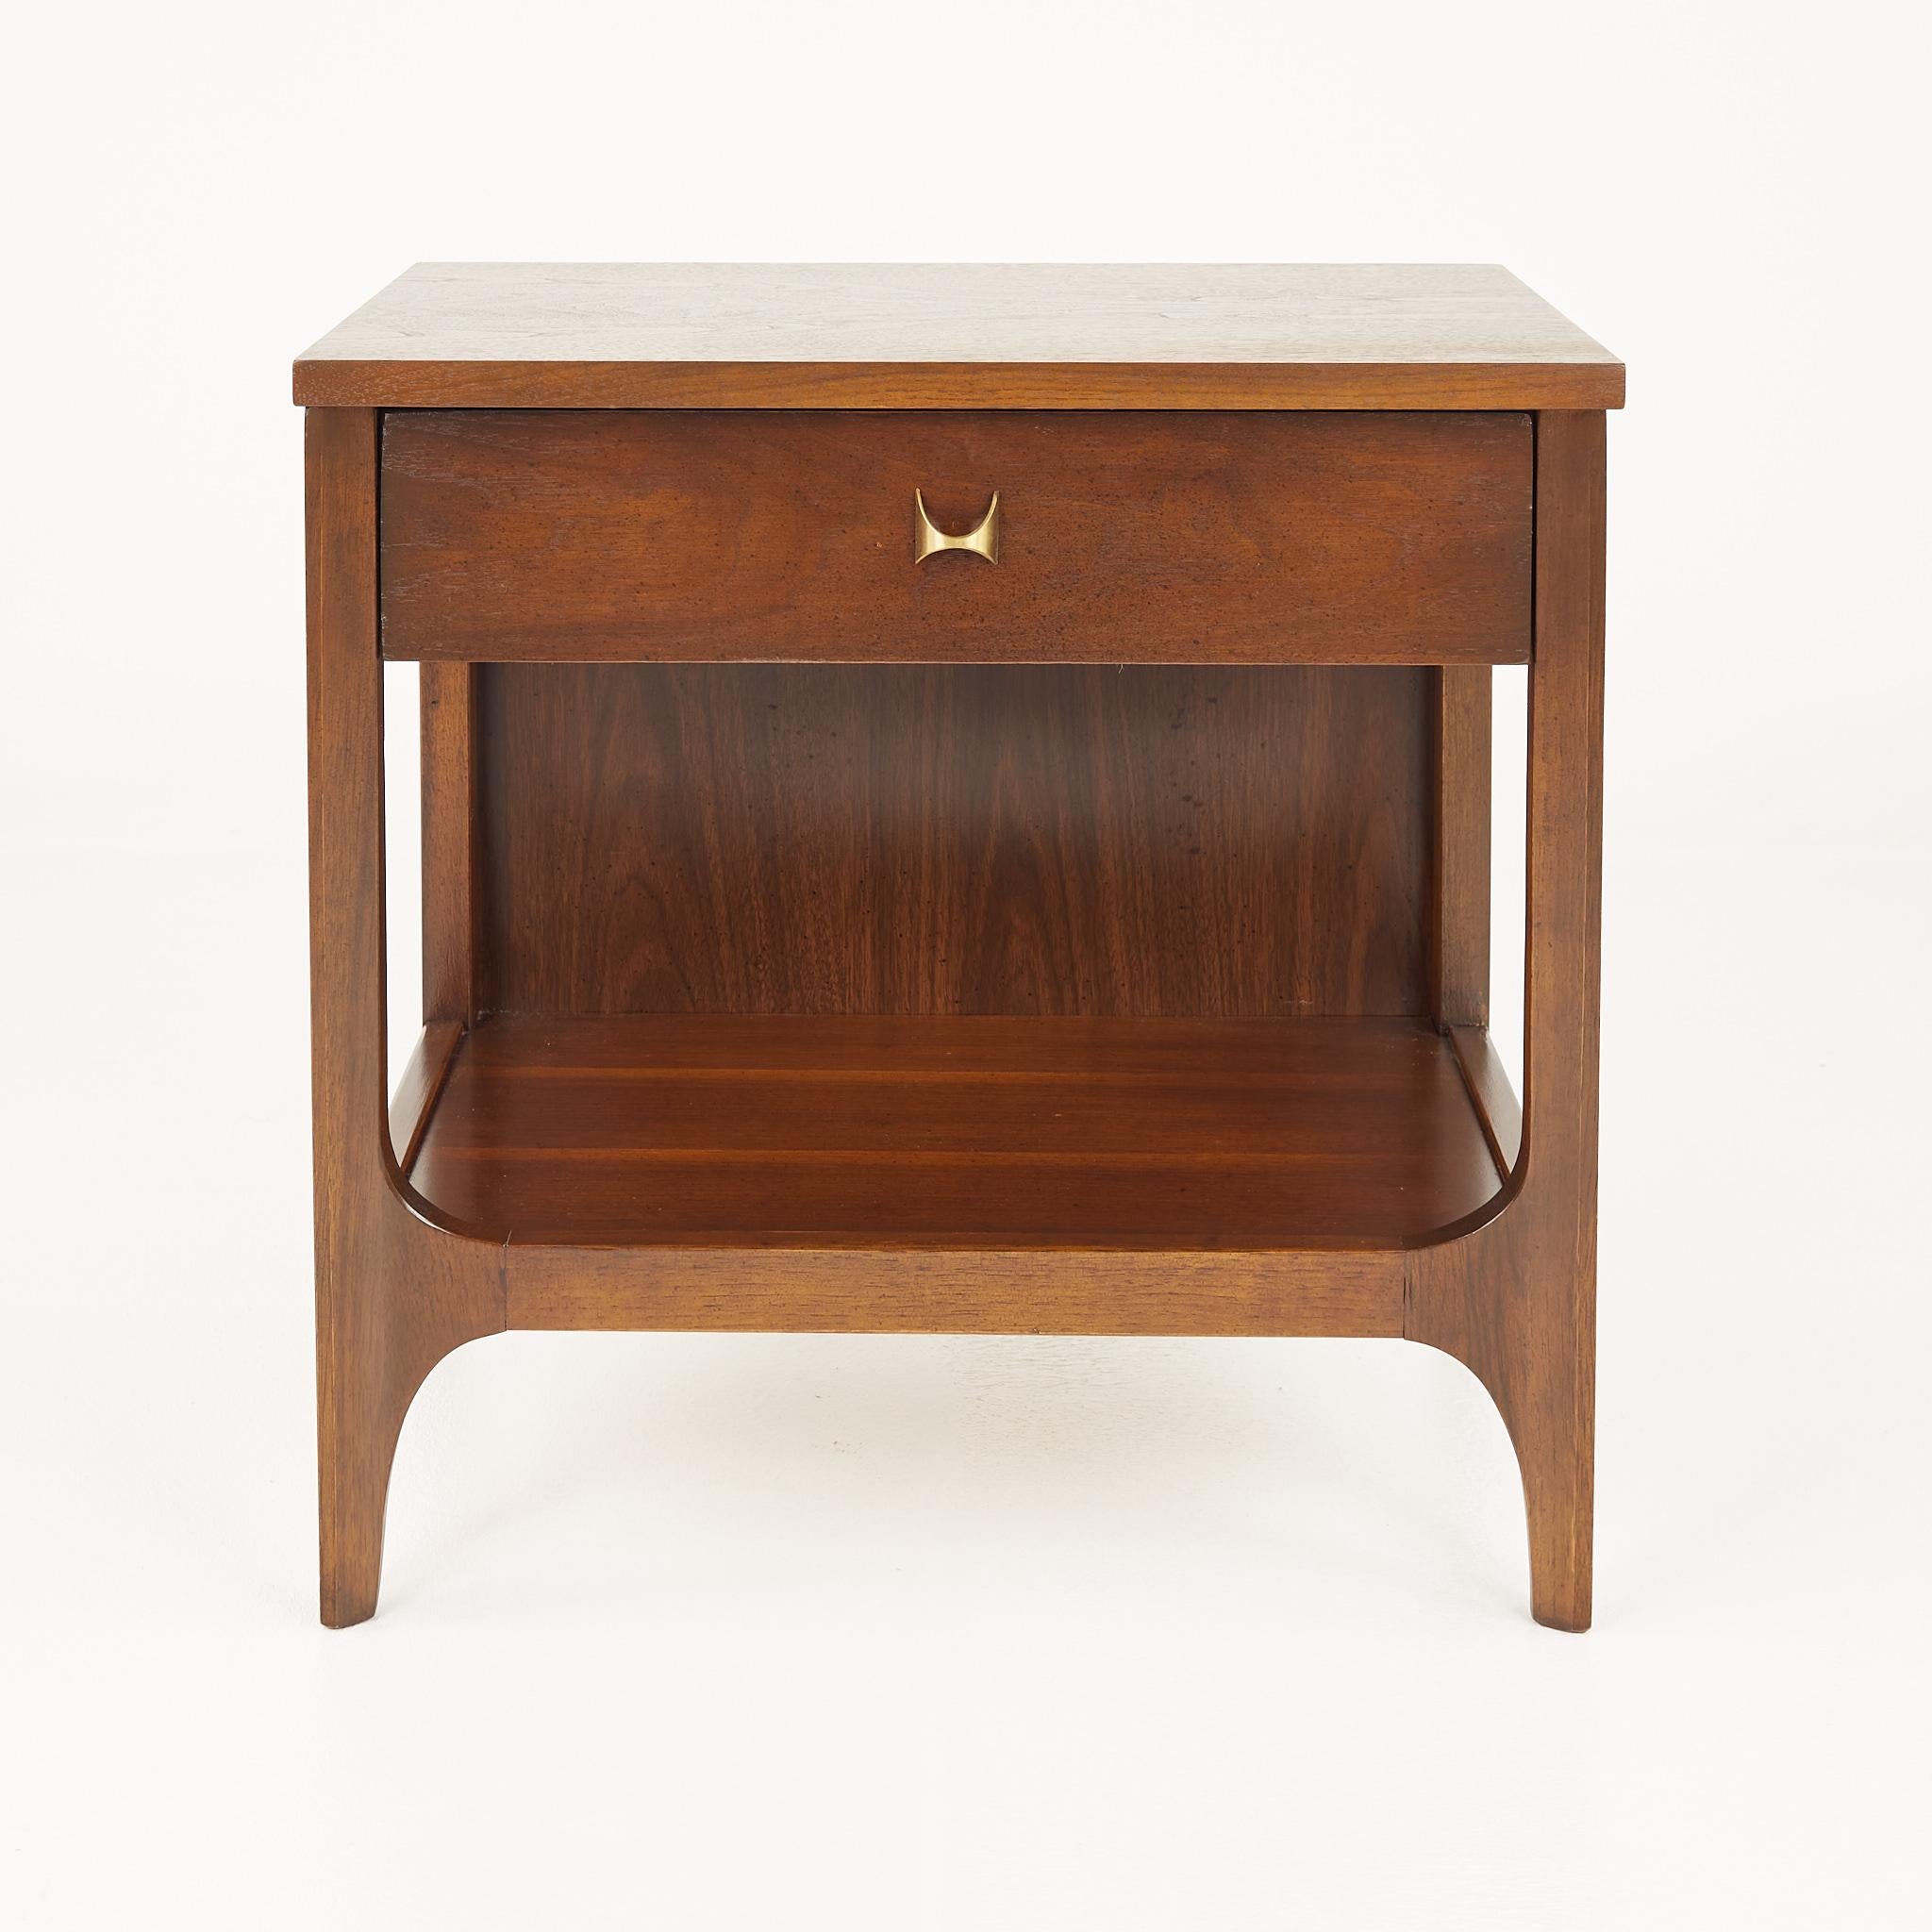 Broyhill Brasilia mid century walnut nightstand
Nightstand measures: 22.25 wide x 15 deep x 22 inches high

?All pieces of furniture can be had in what we call restored vintage condition. That means the piece is restored upon purchase so it’s